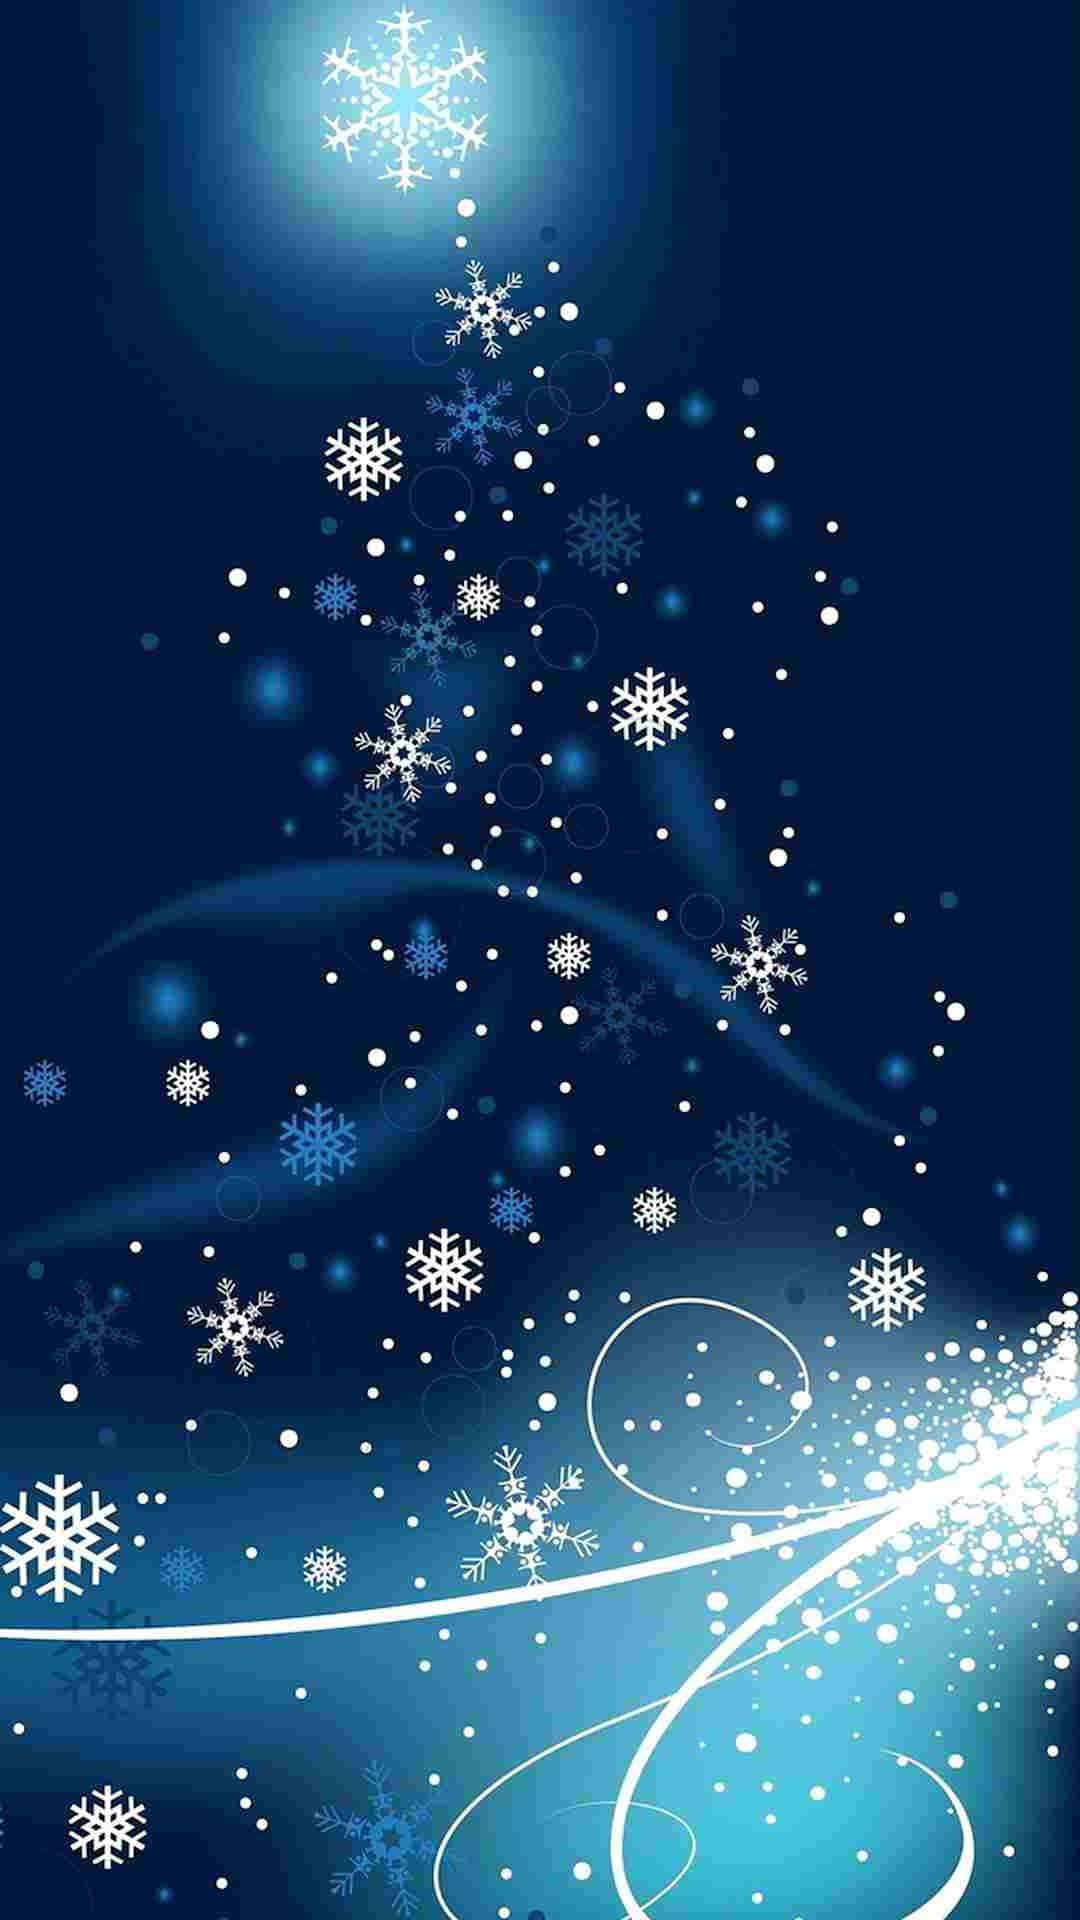 Get in the holiday spirit with a White Christmas Iphone Wallpaper